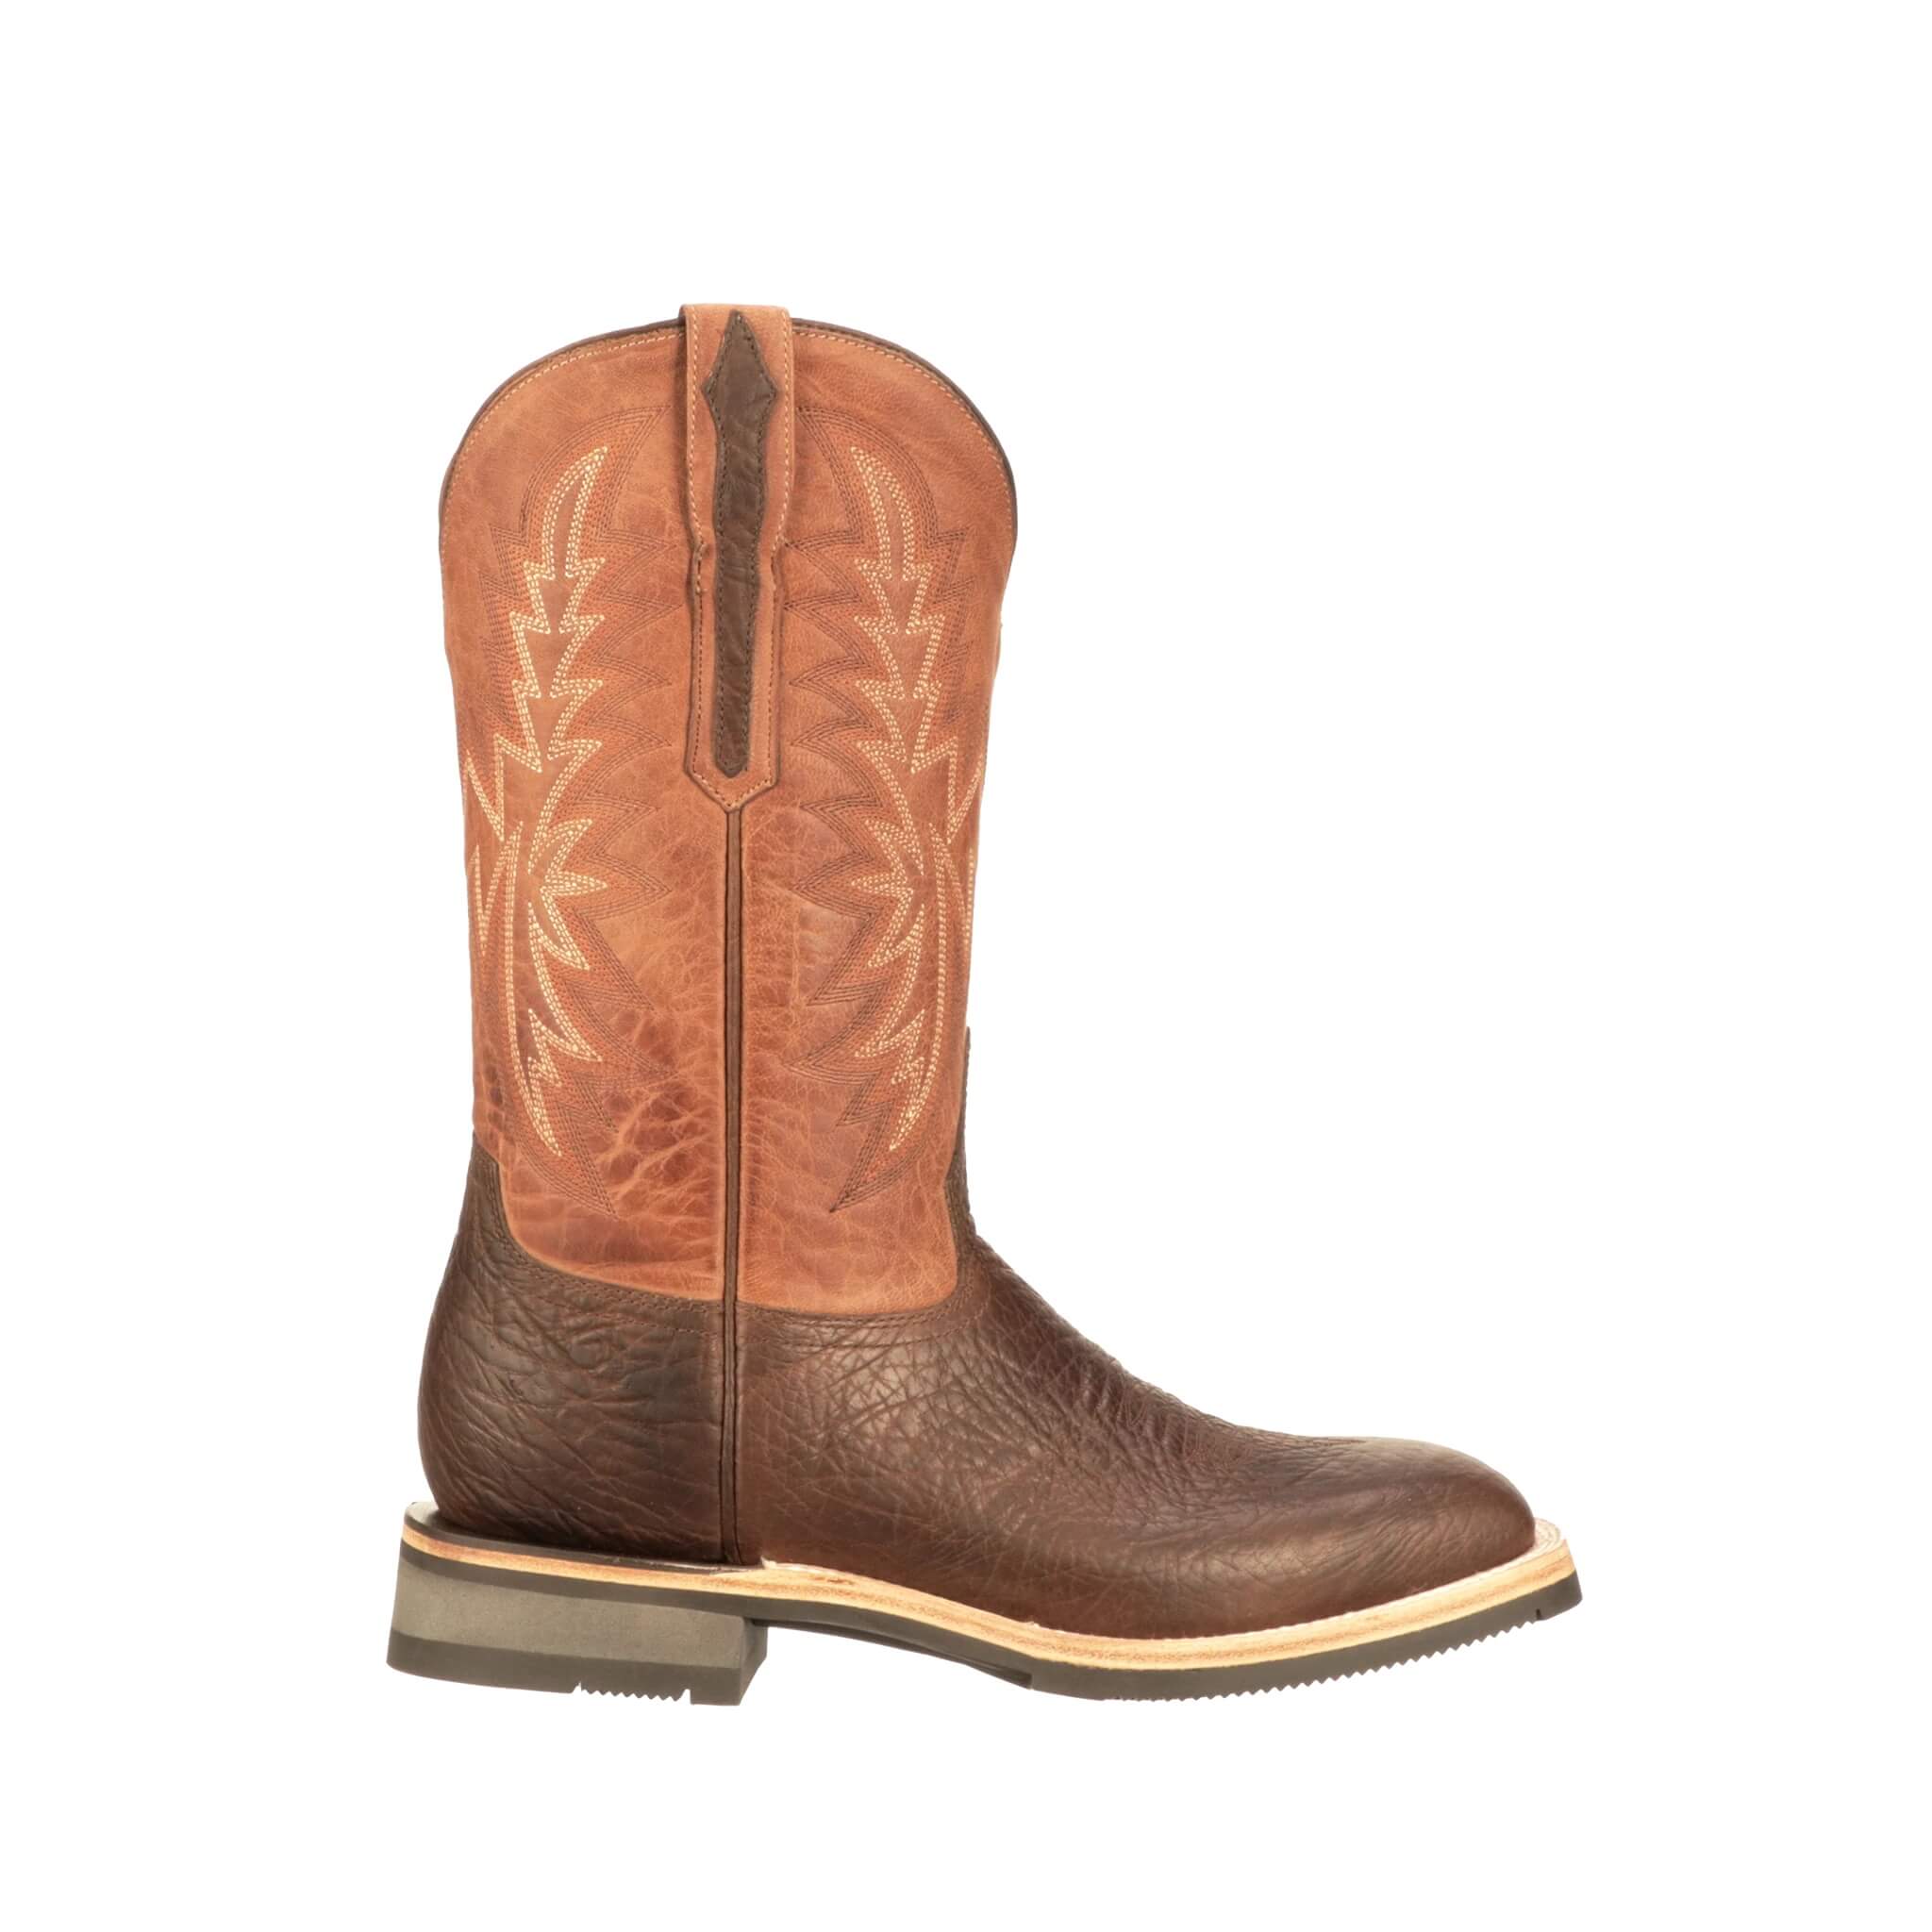 Lucchese Boots Review - Must Read This Before Buying